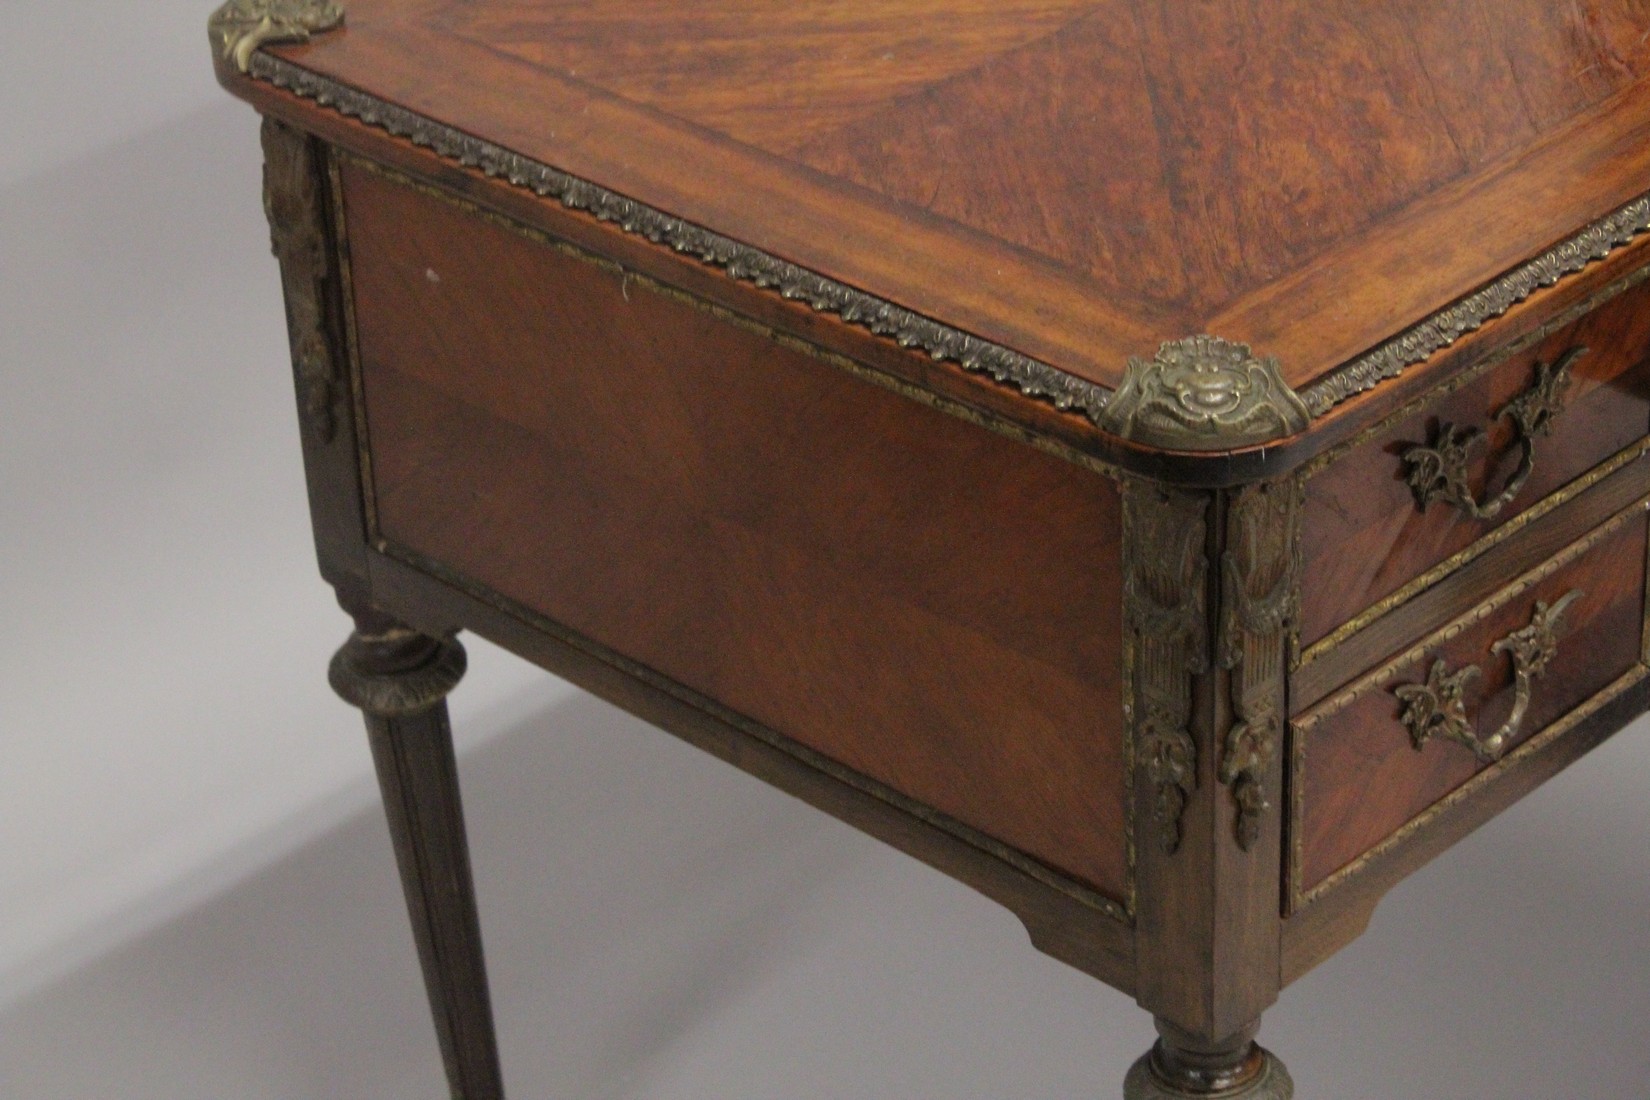 A LOUIS XVITH DESIGN WRITING TABLE with wooden top, five drawers on turned legs with ormolu - Image 5 of 7